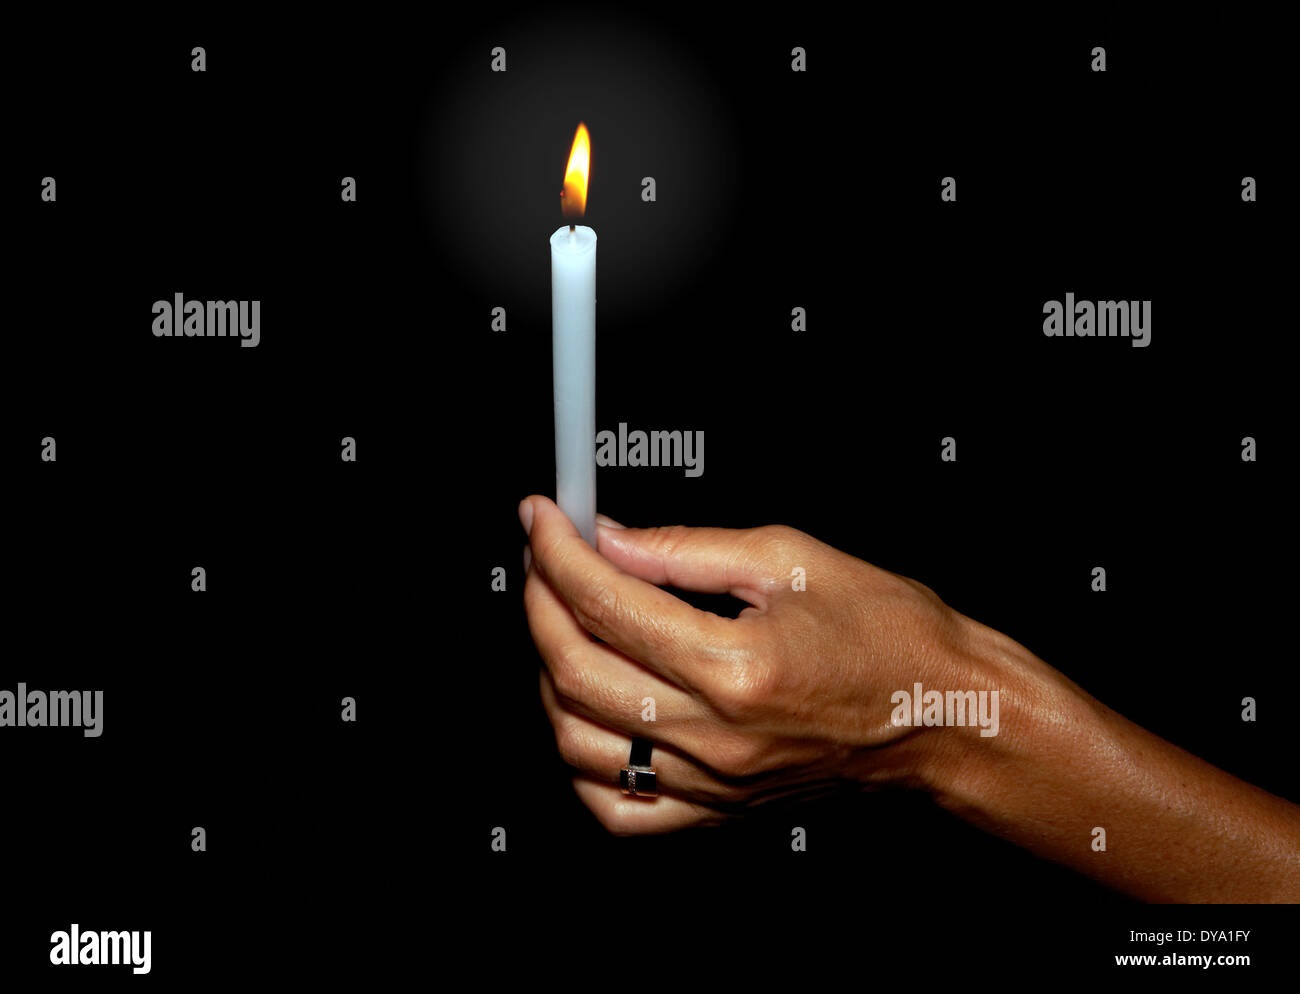 Hand Holding Candle High Resolution Stock Photography and Images - Alamy